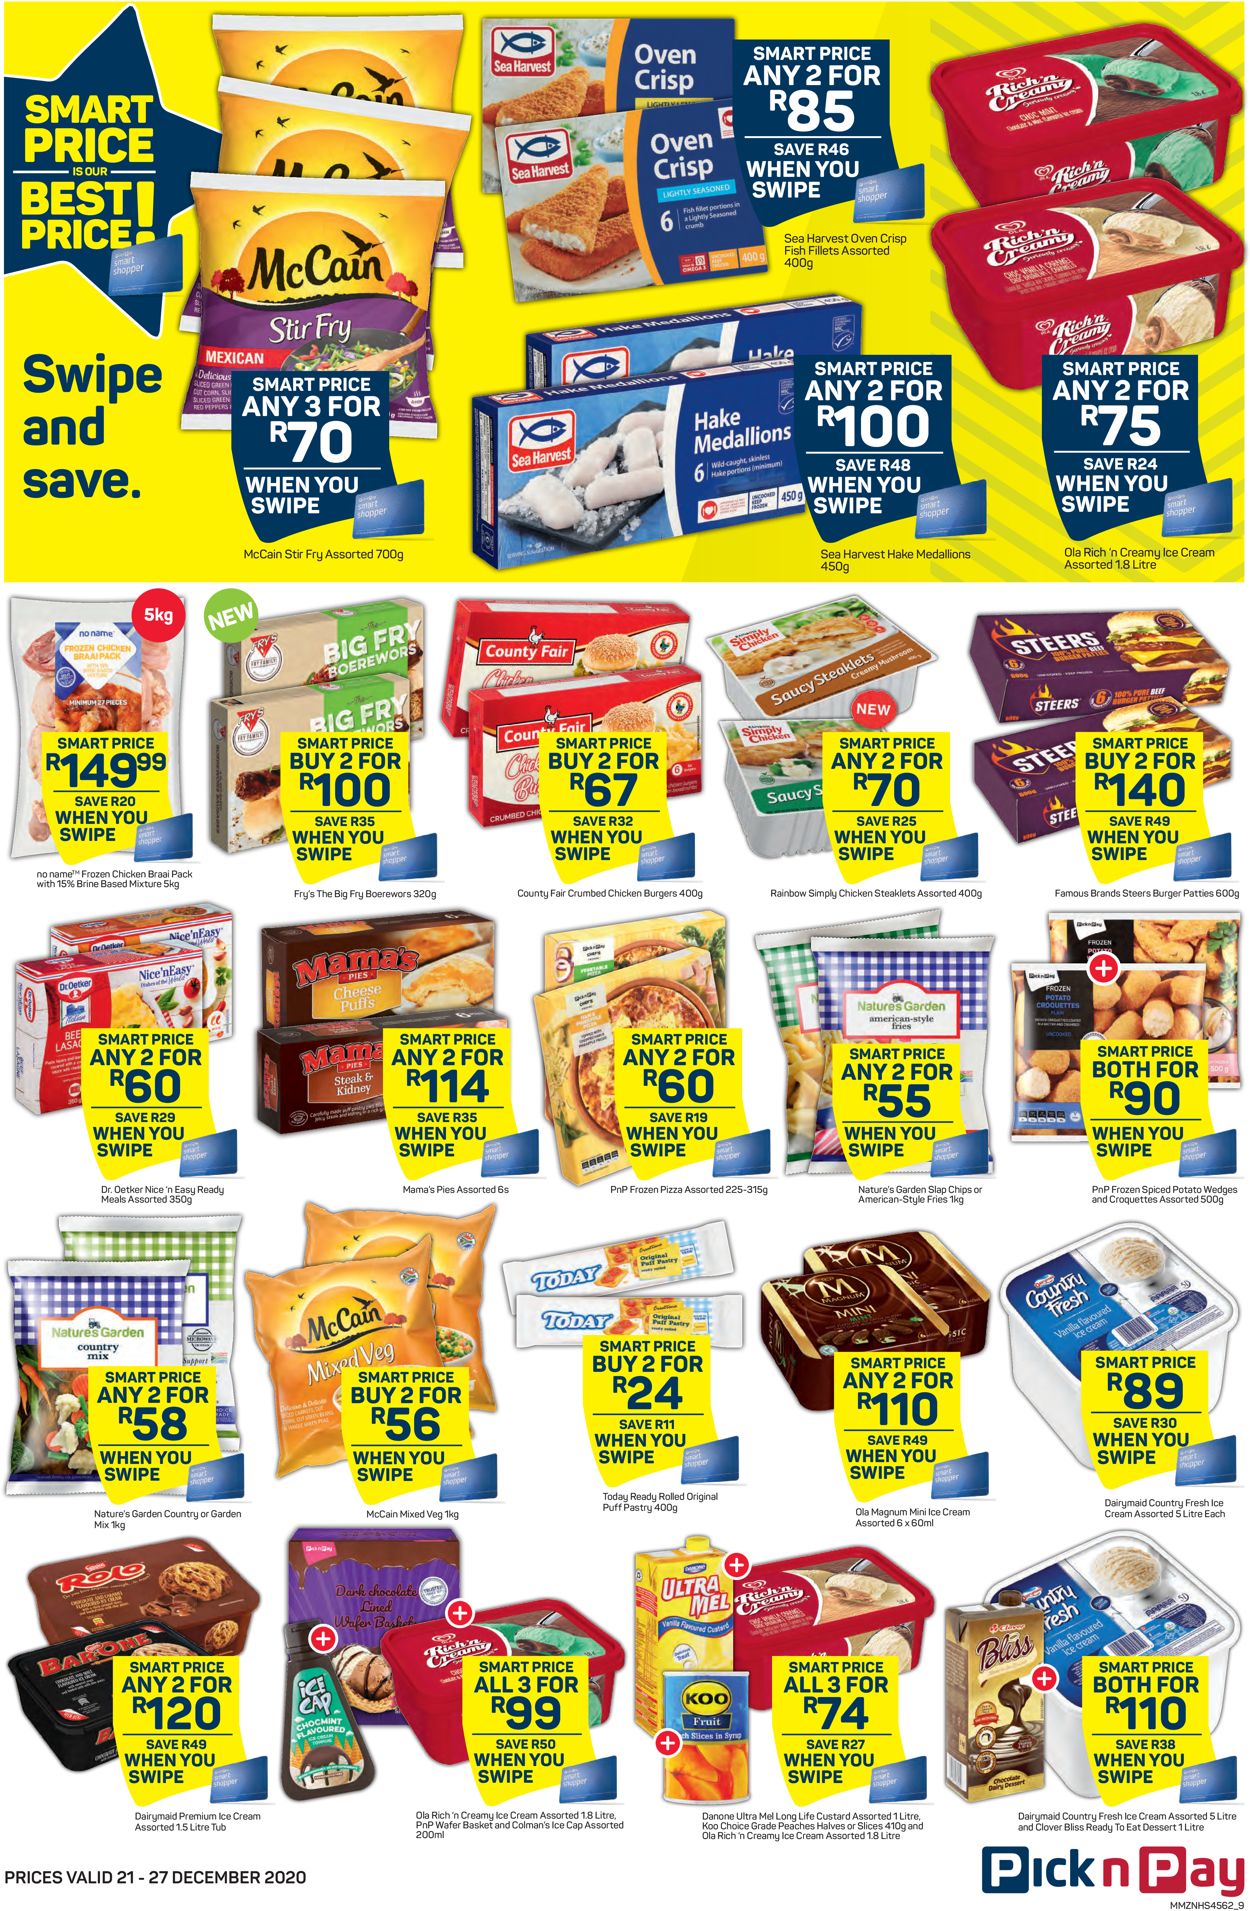 Pick n Pay Christmas Countdown 2020 Catalogue - 2020/12/21-2020/12/27 (Page 10)